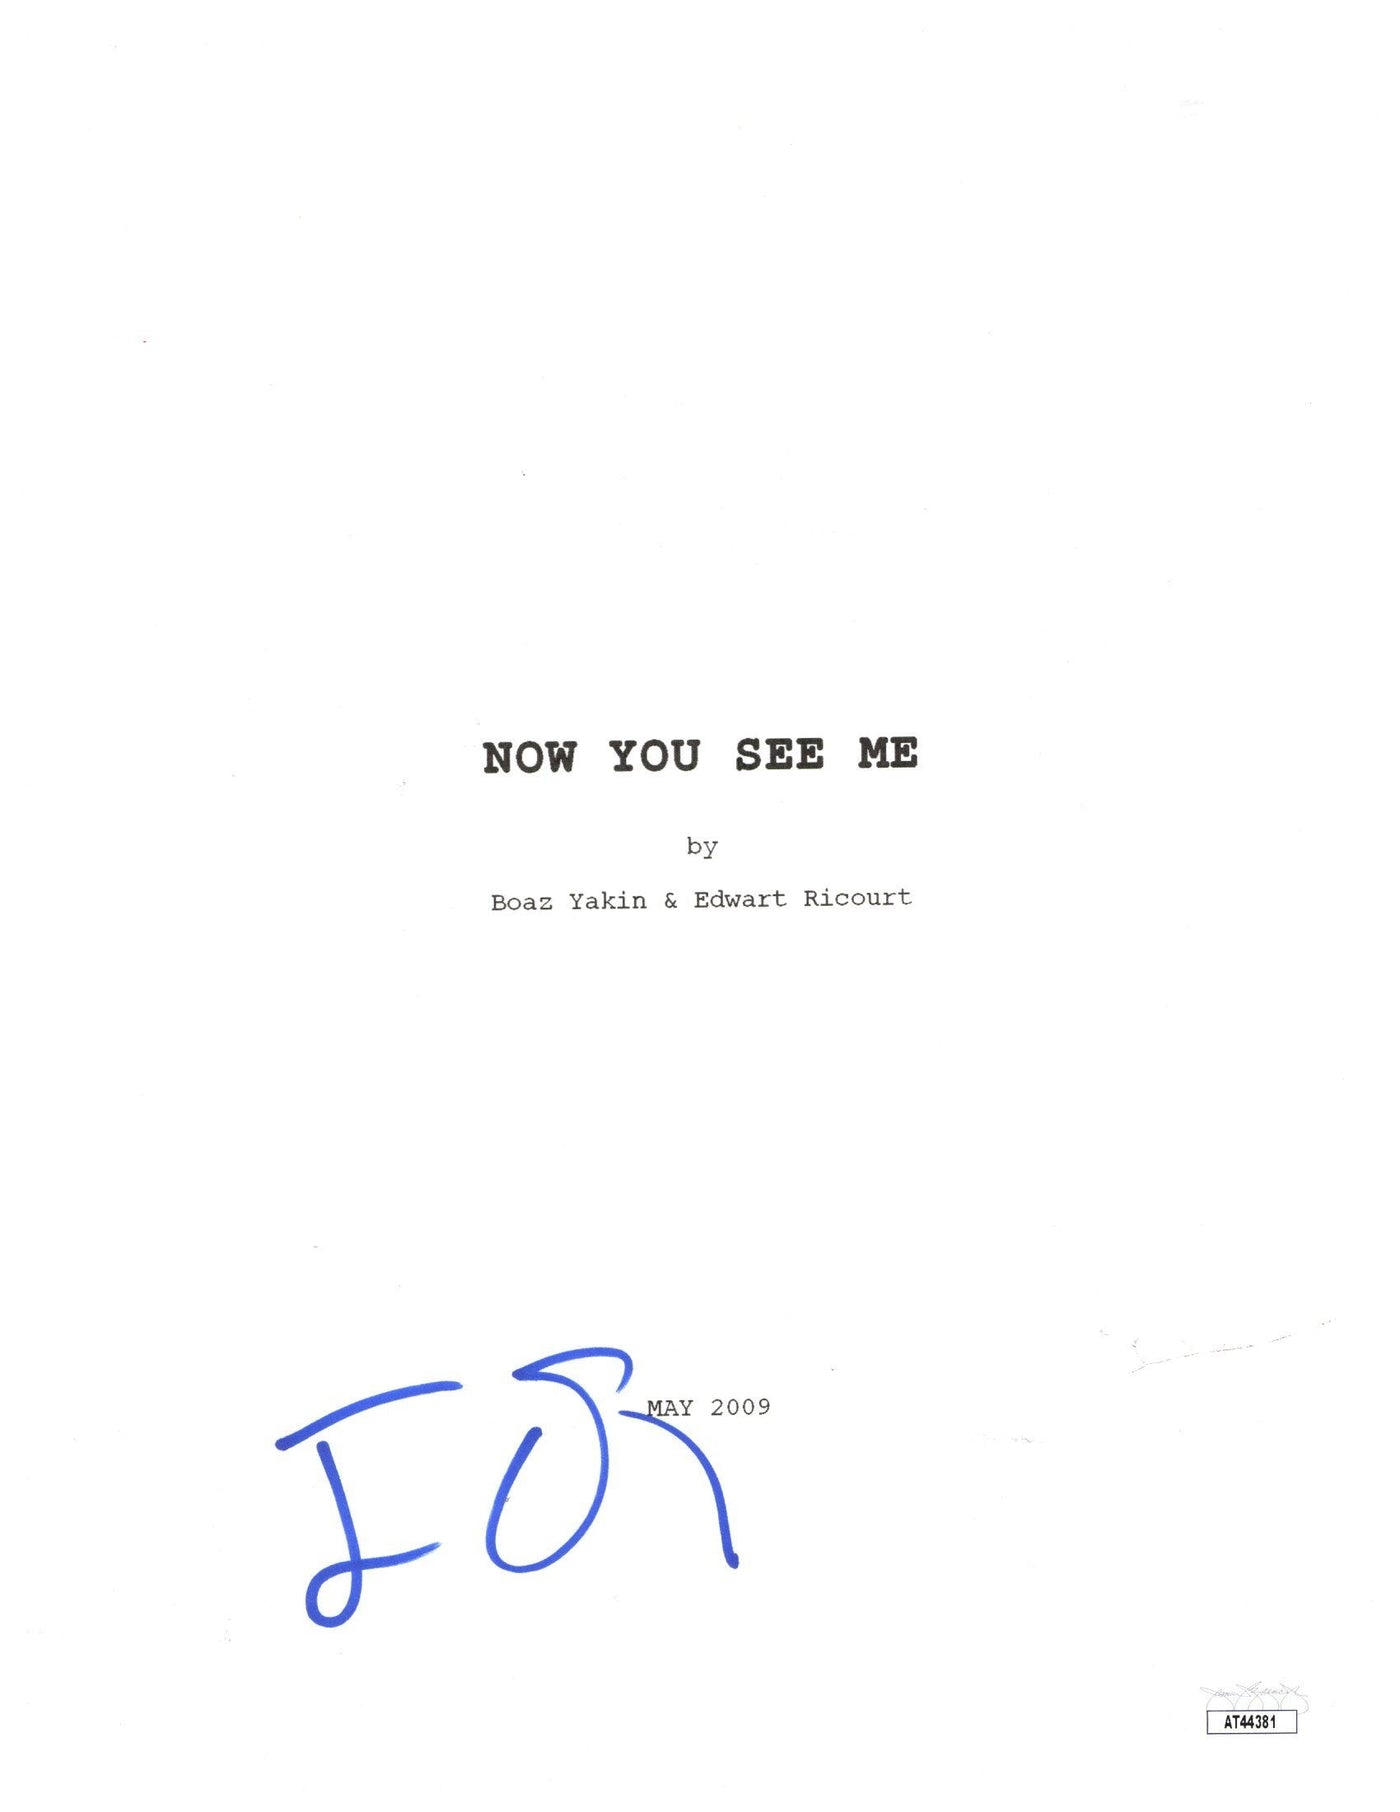 Jesse Eisenberg Signed Now You See Me Movie Script Cover Autographed JSA COA